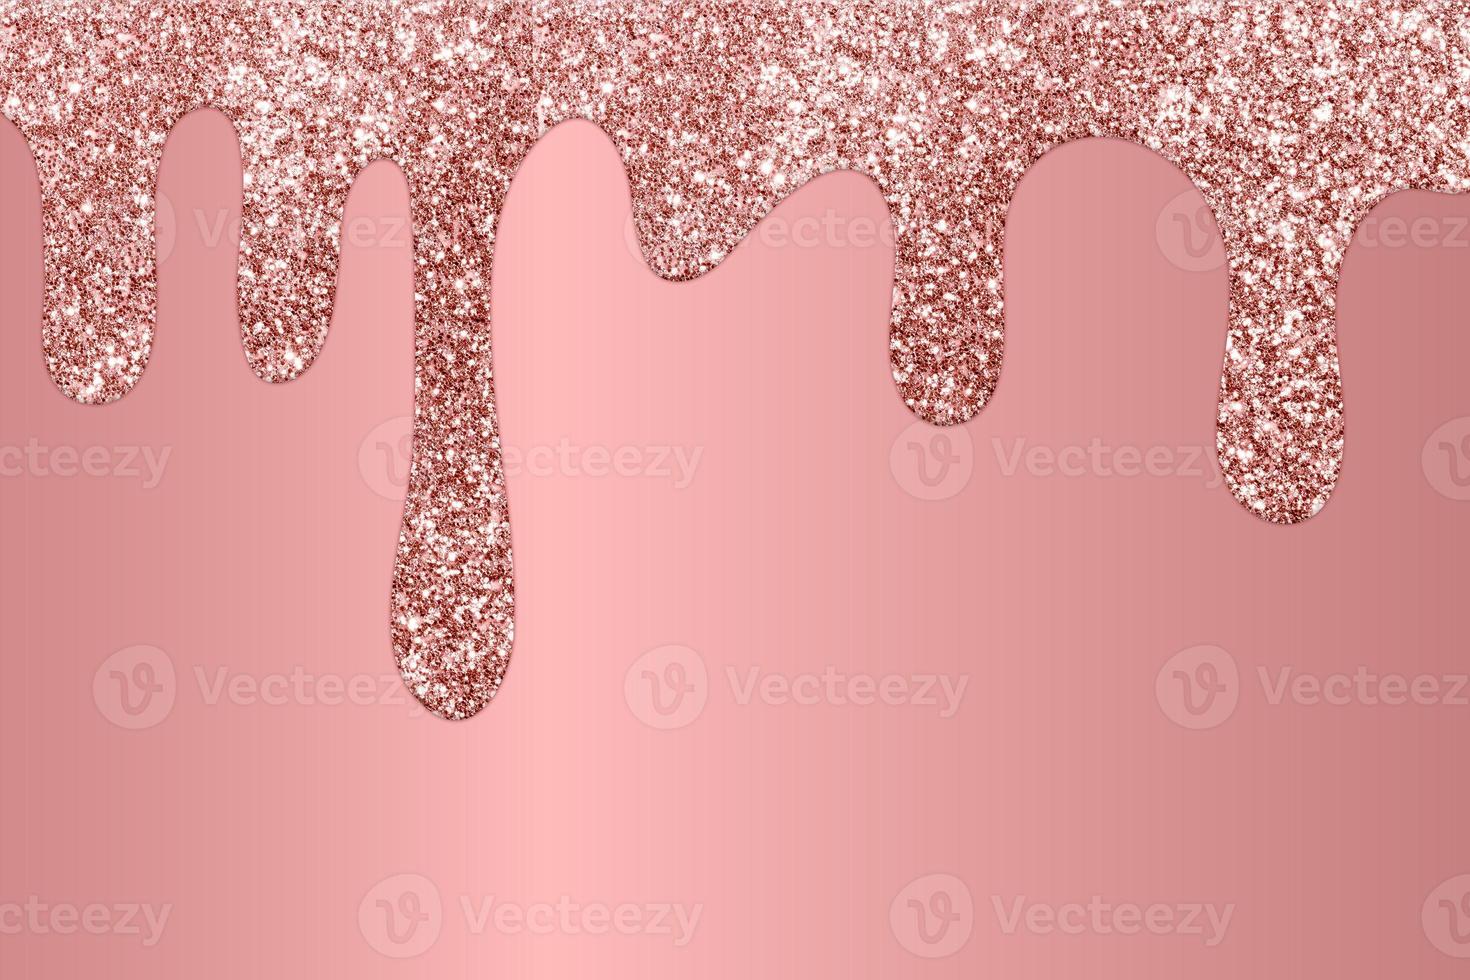 Rose Gold Glitter Texture Pink Red Sparkling Shiny Wrapping Paper Background  For Christmas Holiday Seasonal Wallpaper Decoration Greeting And Wedding  Invitation Card Design Element Stock Photo Picture And Royalty Free Image  Image